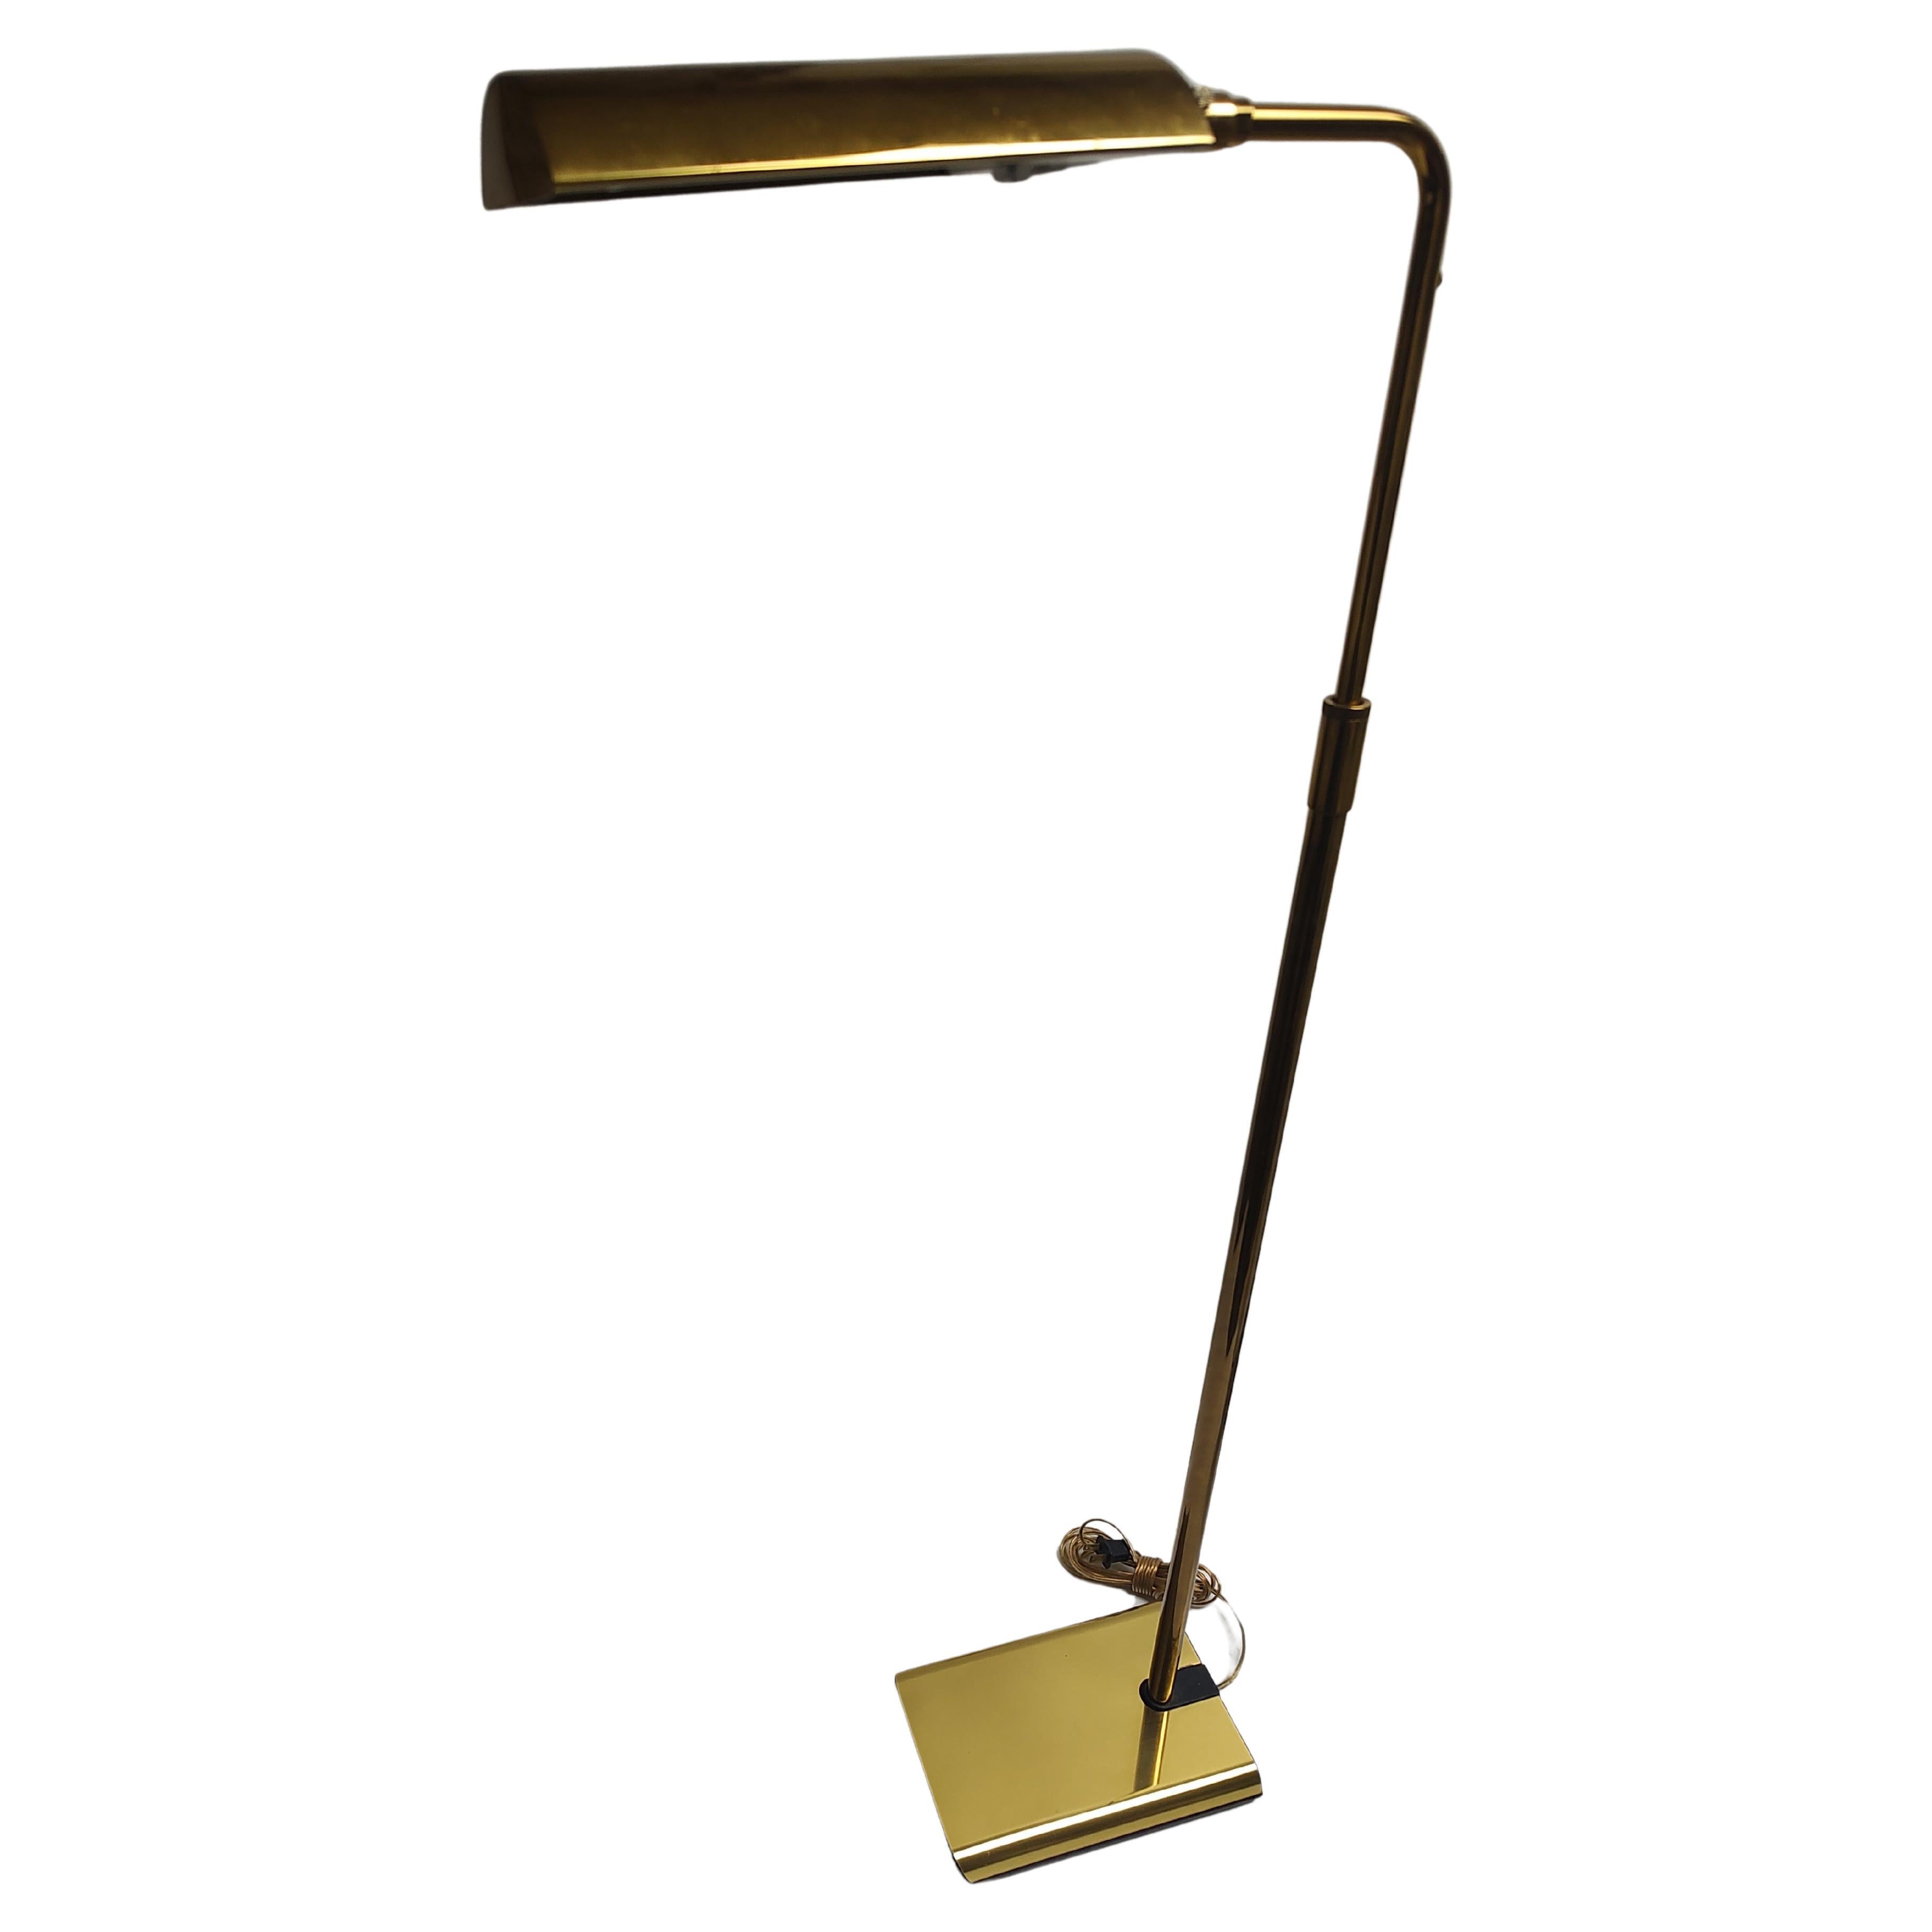 Simple and elegant brass reading pharmacy lamp by Koch & Lowy c1975. In excellent vintage condition with minimal wear. Totally adjustable in height from 41.5 to 47.5 and flexing tilting shade can be positioned to your needs. Weighted base which is